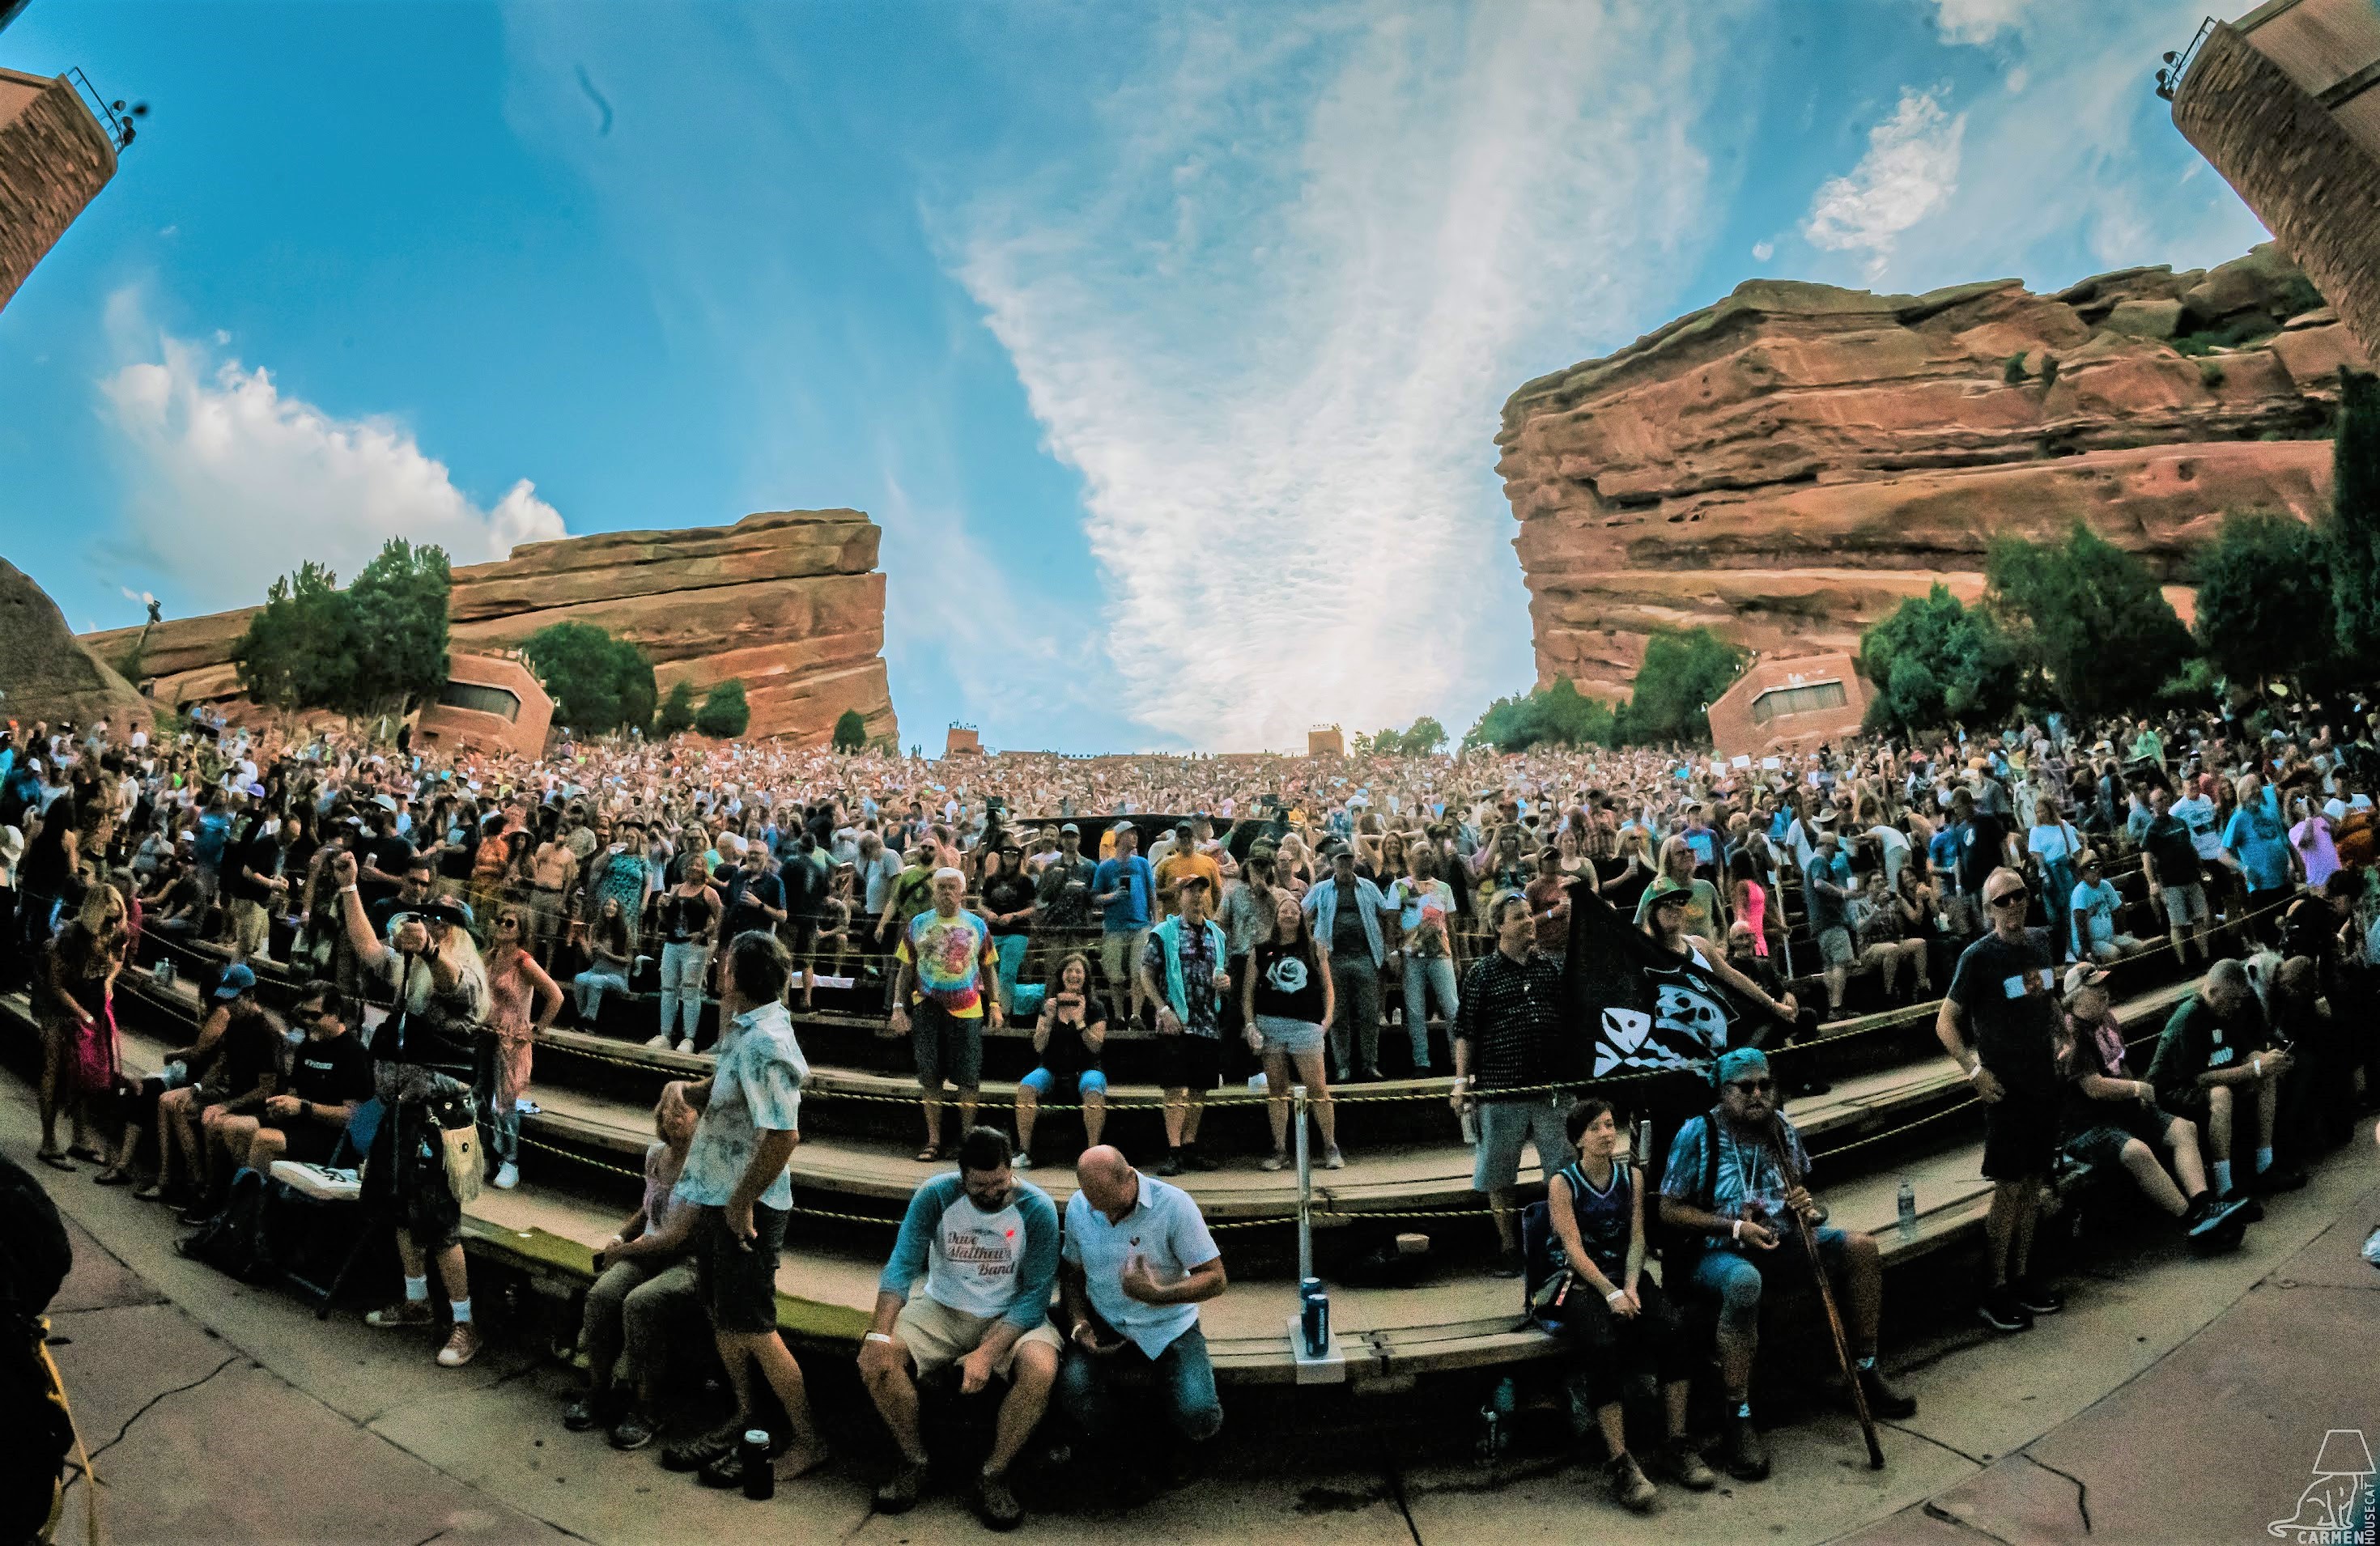 [SATURDAY NIGHT REVIEW] Leftover Cheese (The String Cheese Incident + Leftover Salmon Collab) Reeked Righteous Fumes Throughout Red Rocks